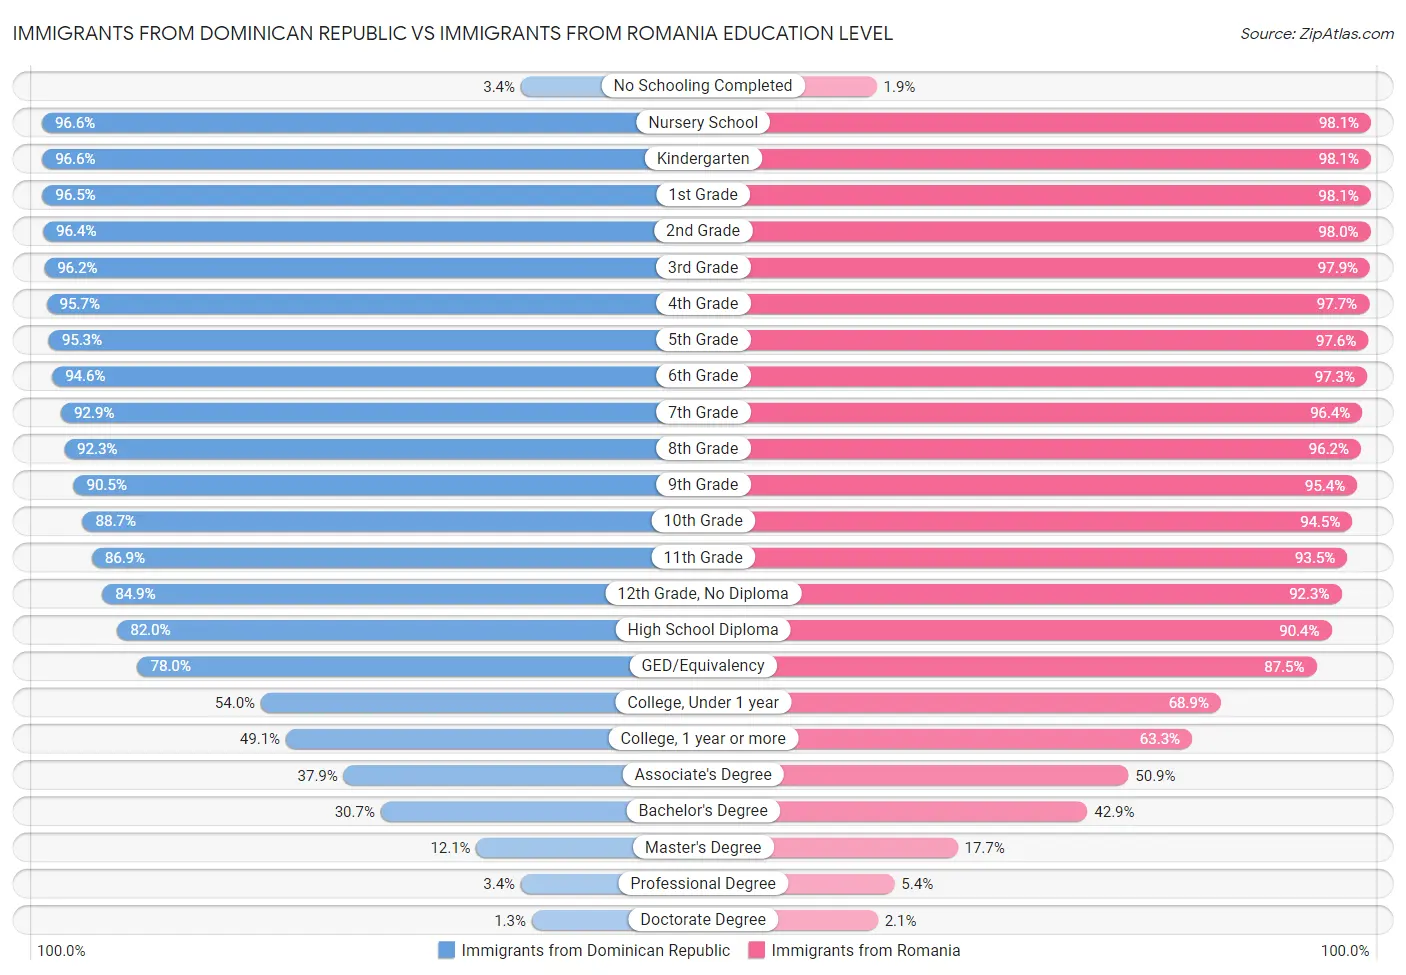 Immigrants from Dominican Republic vs Immigrants from Romania Education Level